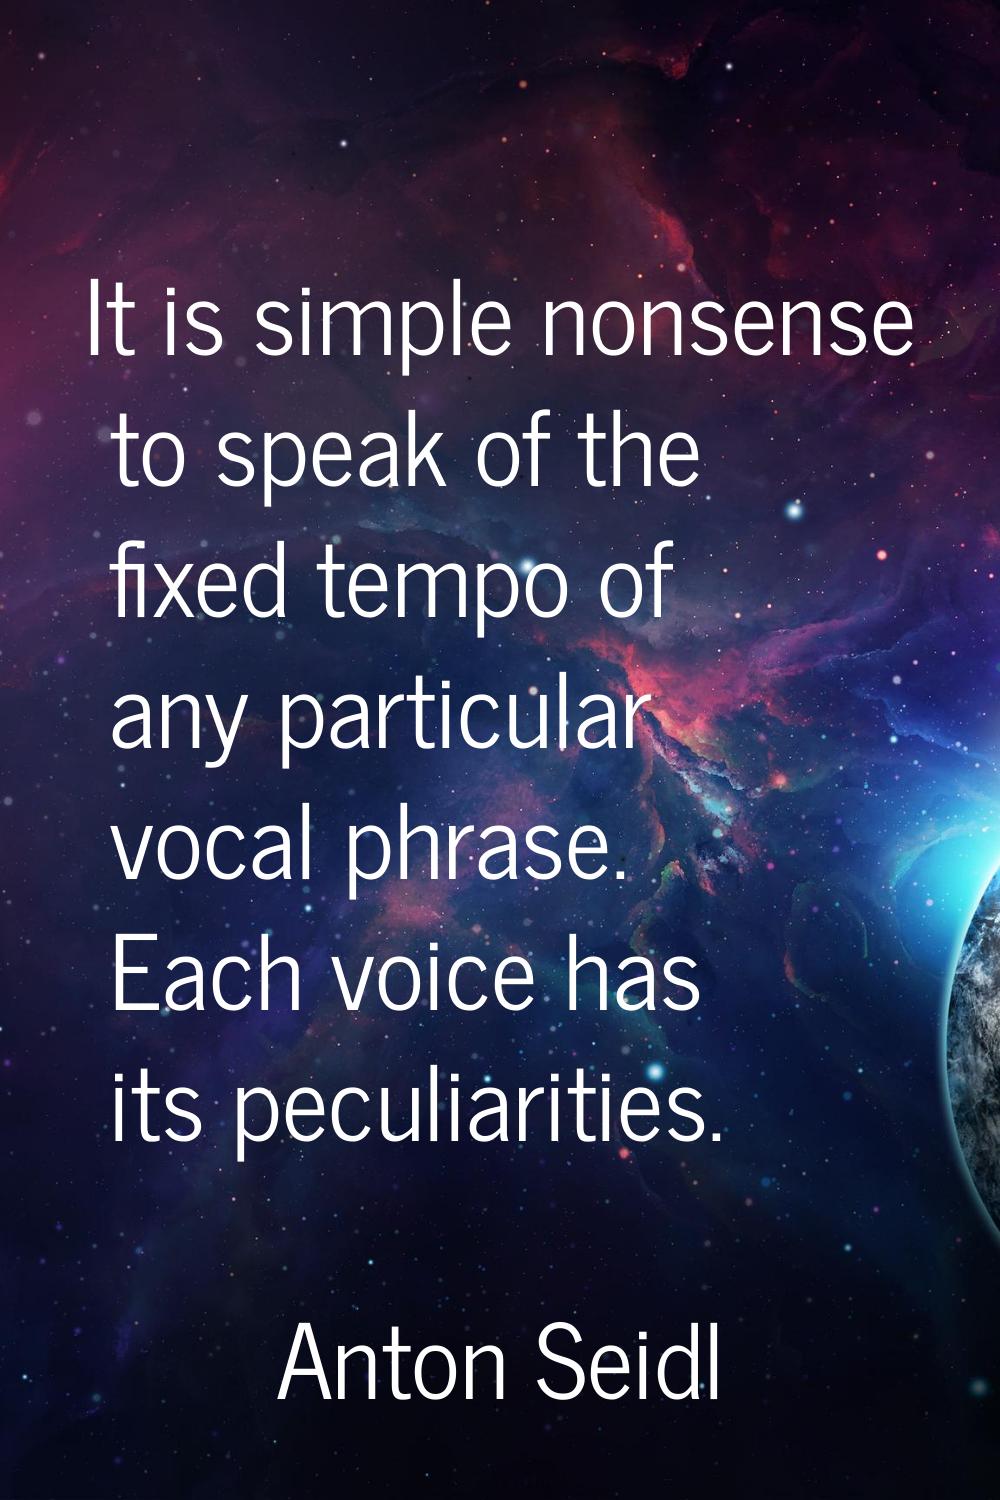 It is simple nonsense to speak of the fixed tempo of any particular vocal phrase. Each voice has it